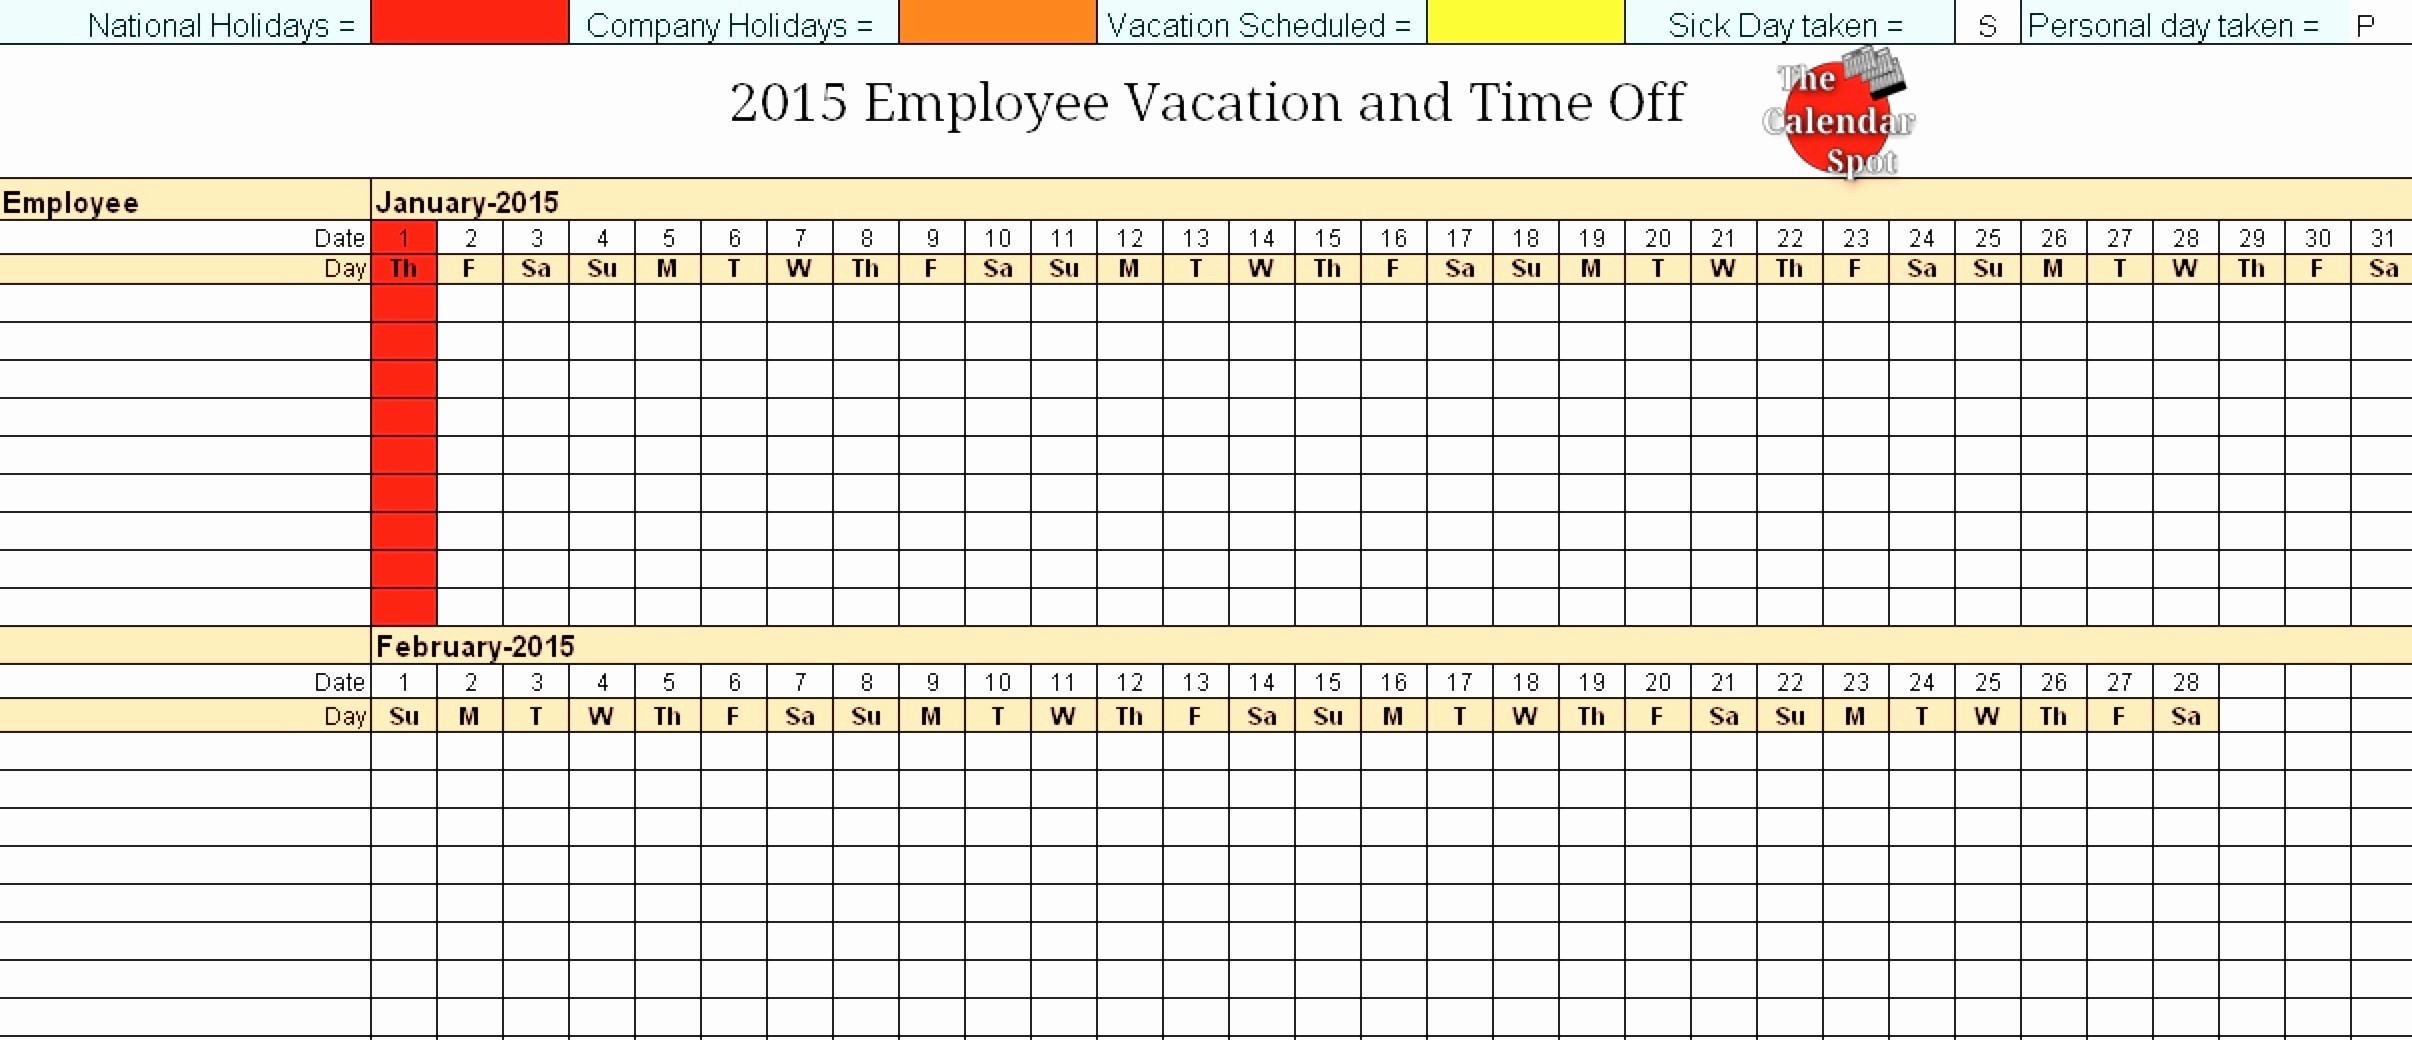 50 Awesome Employee Training Tracker Excel DOCUMENTS IDEAS Document